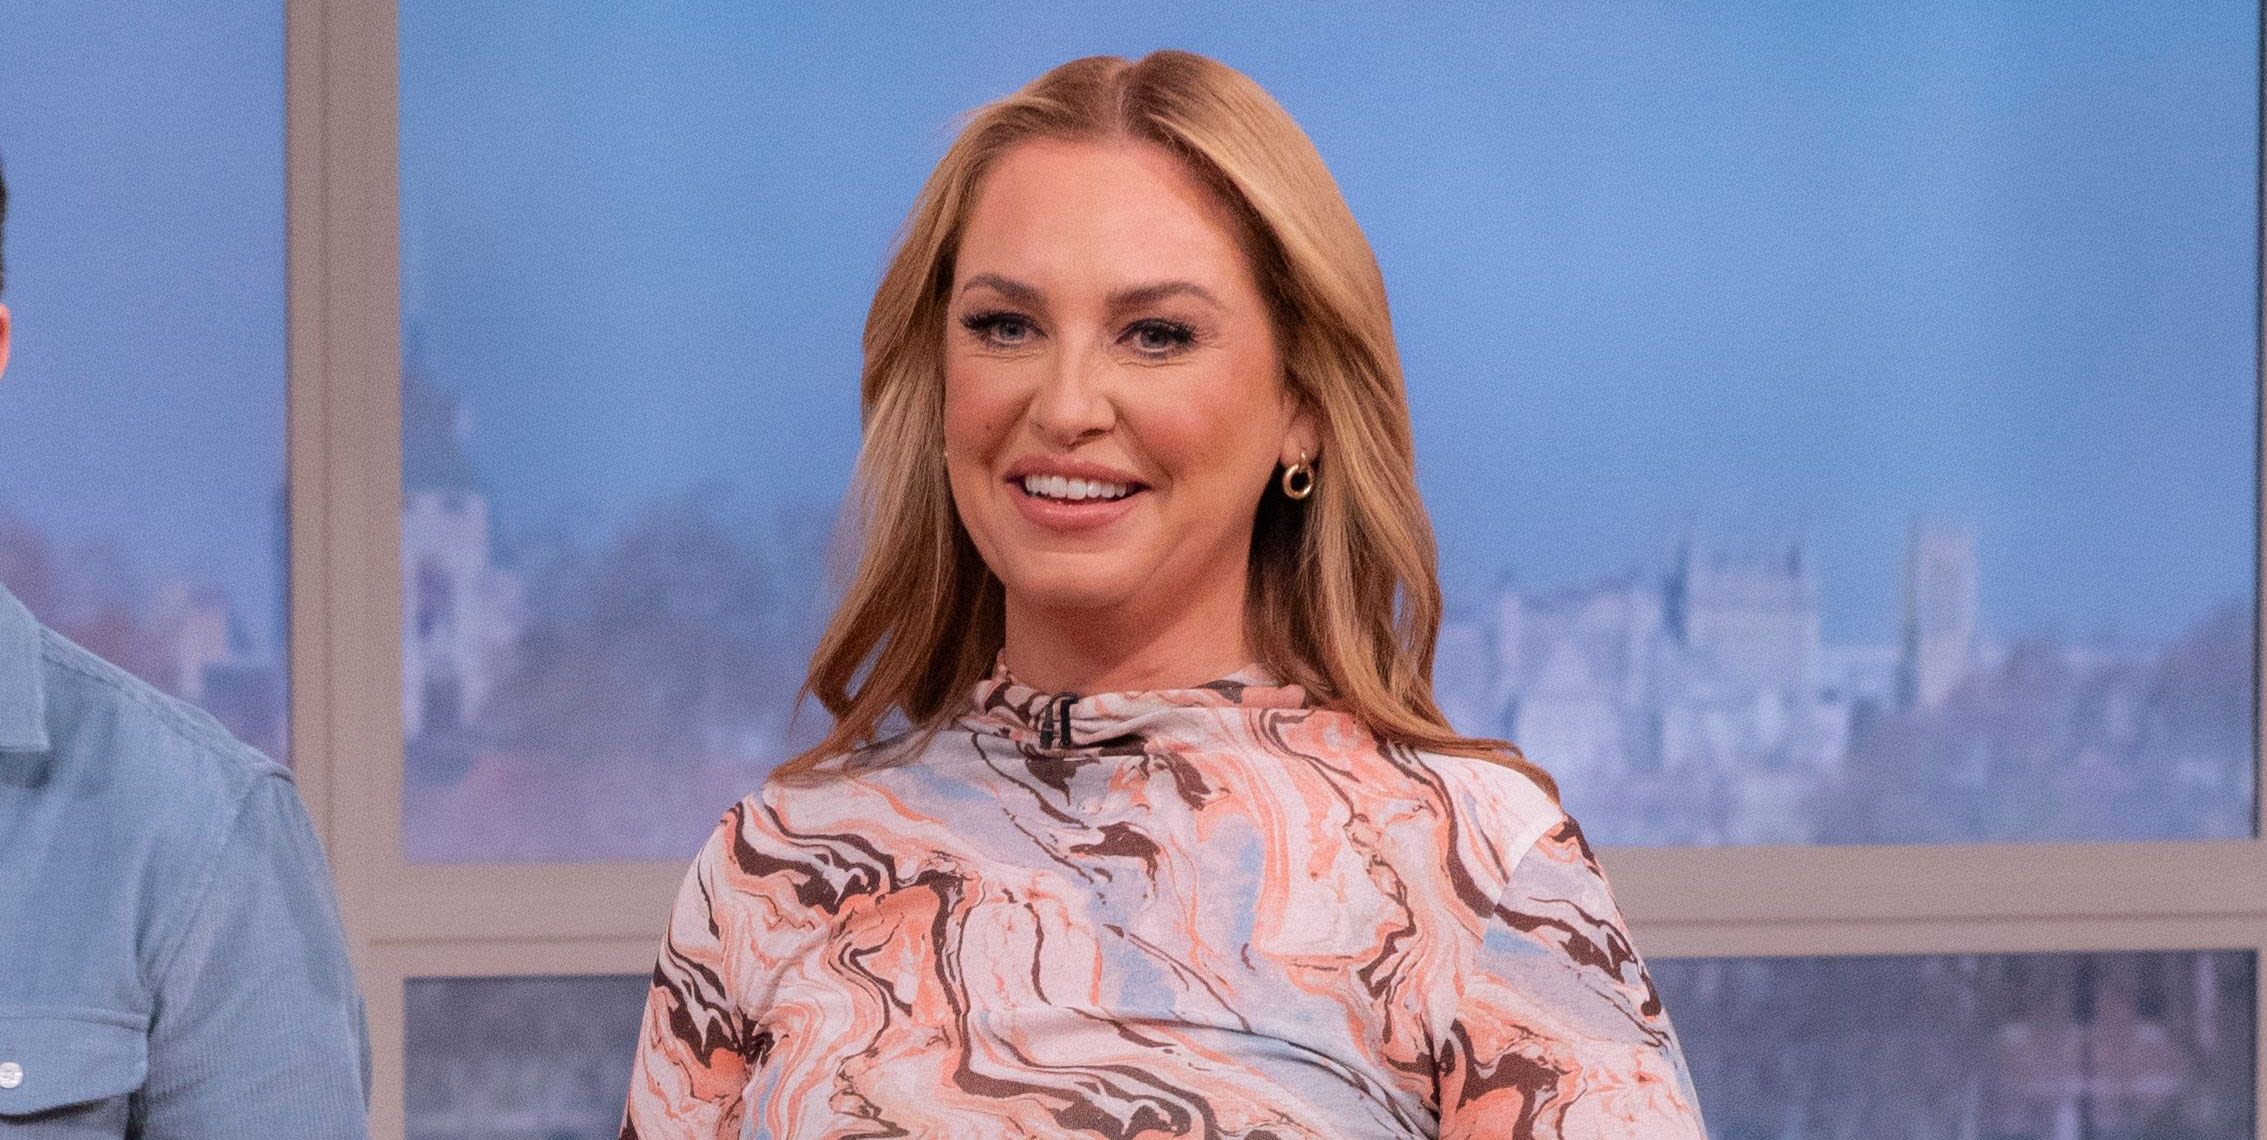 This Morning - Where to buy Josie Gibson's outfits